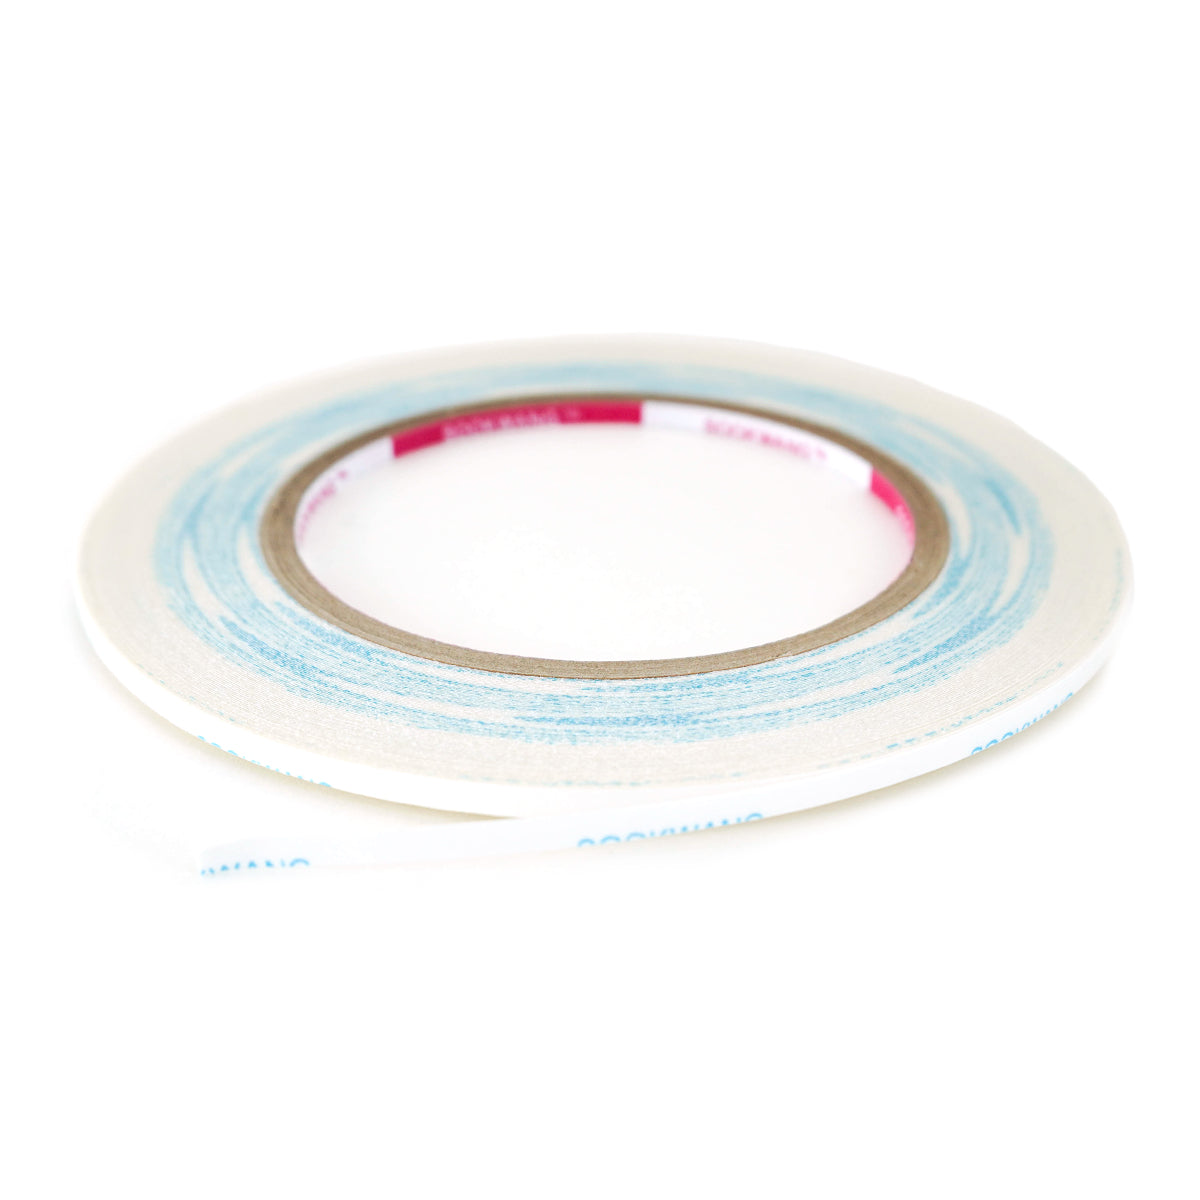 Scor-Tape 1/4 Wide x 27 Yards Yards Double-Sided Adhesive